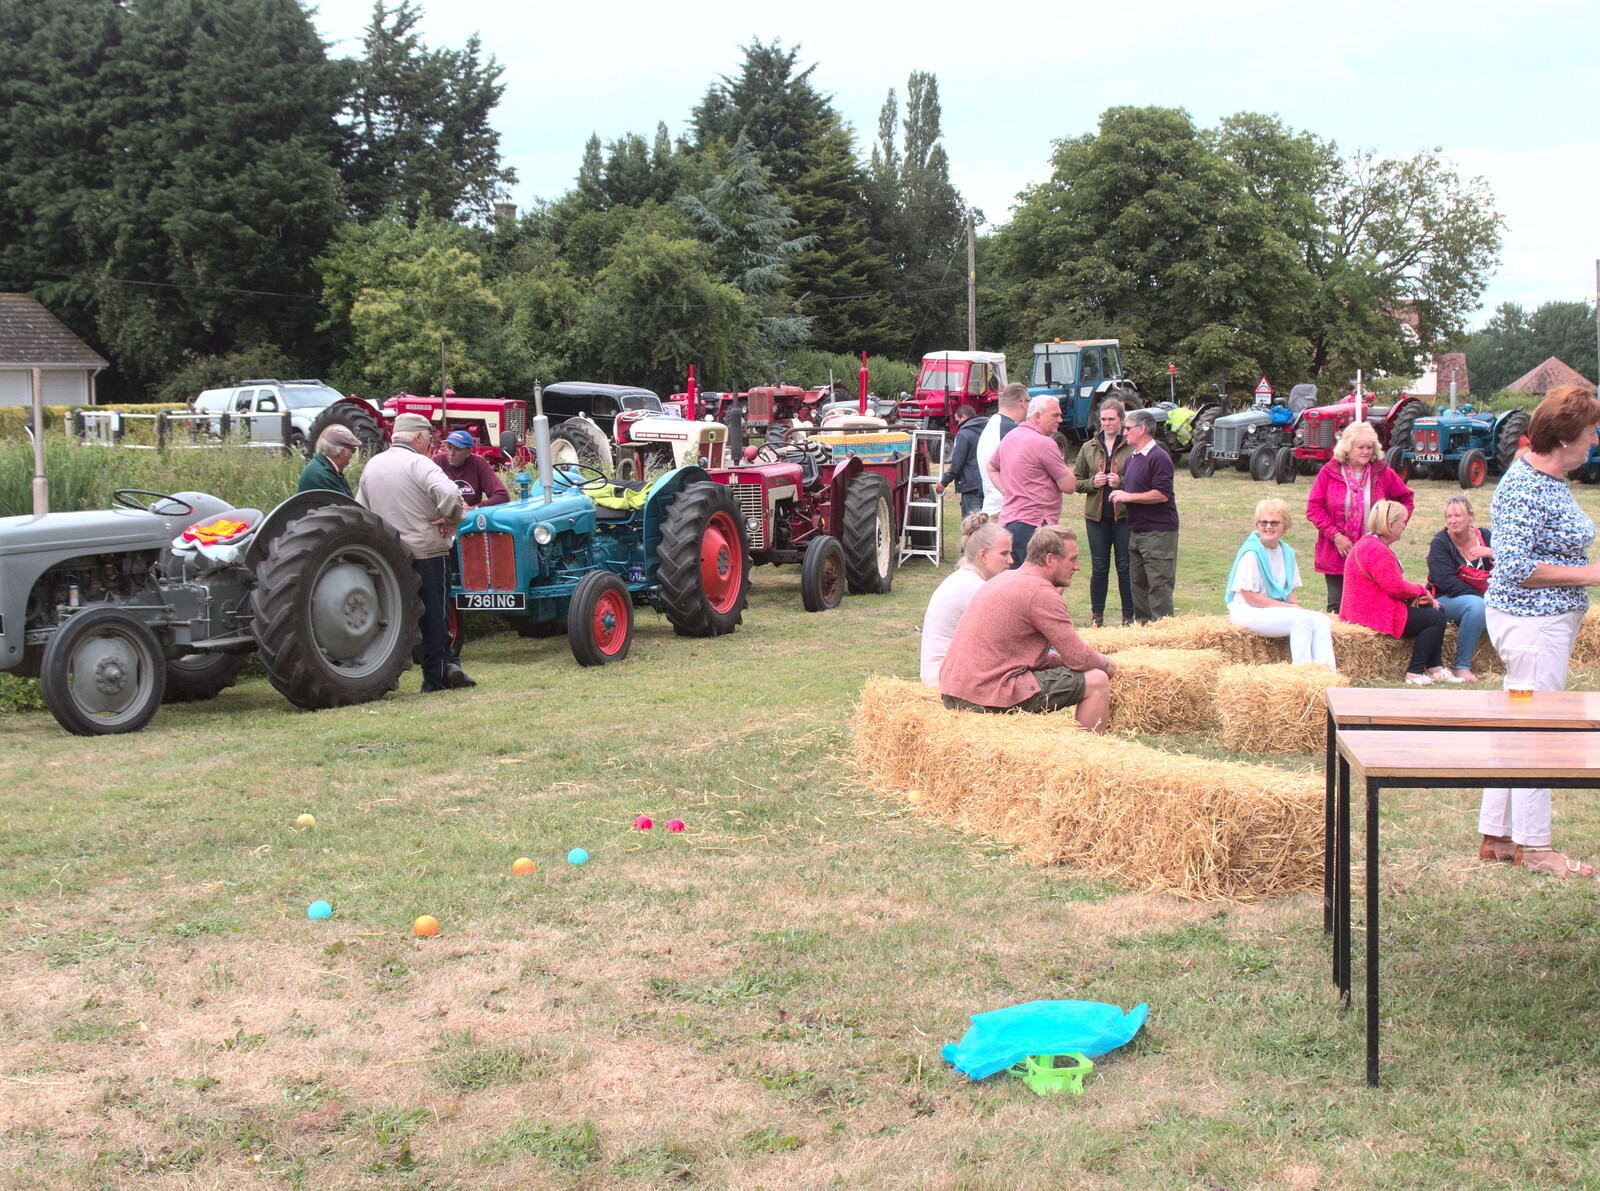 The vintage tractors have turned up from Thrandeston Pig, Little Green, Thrandeston, Suffolk - 25th June 2017